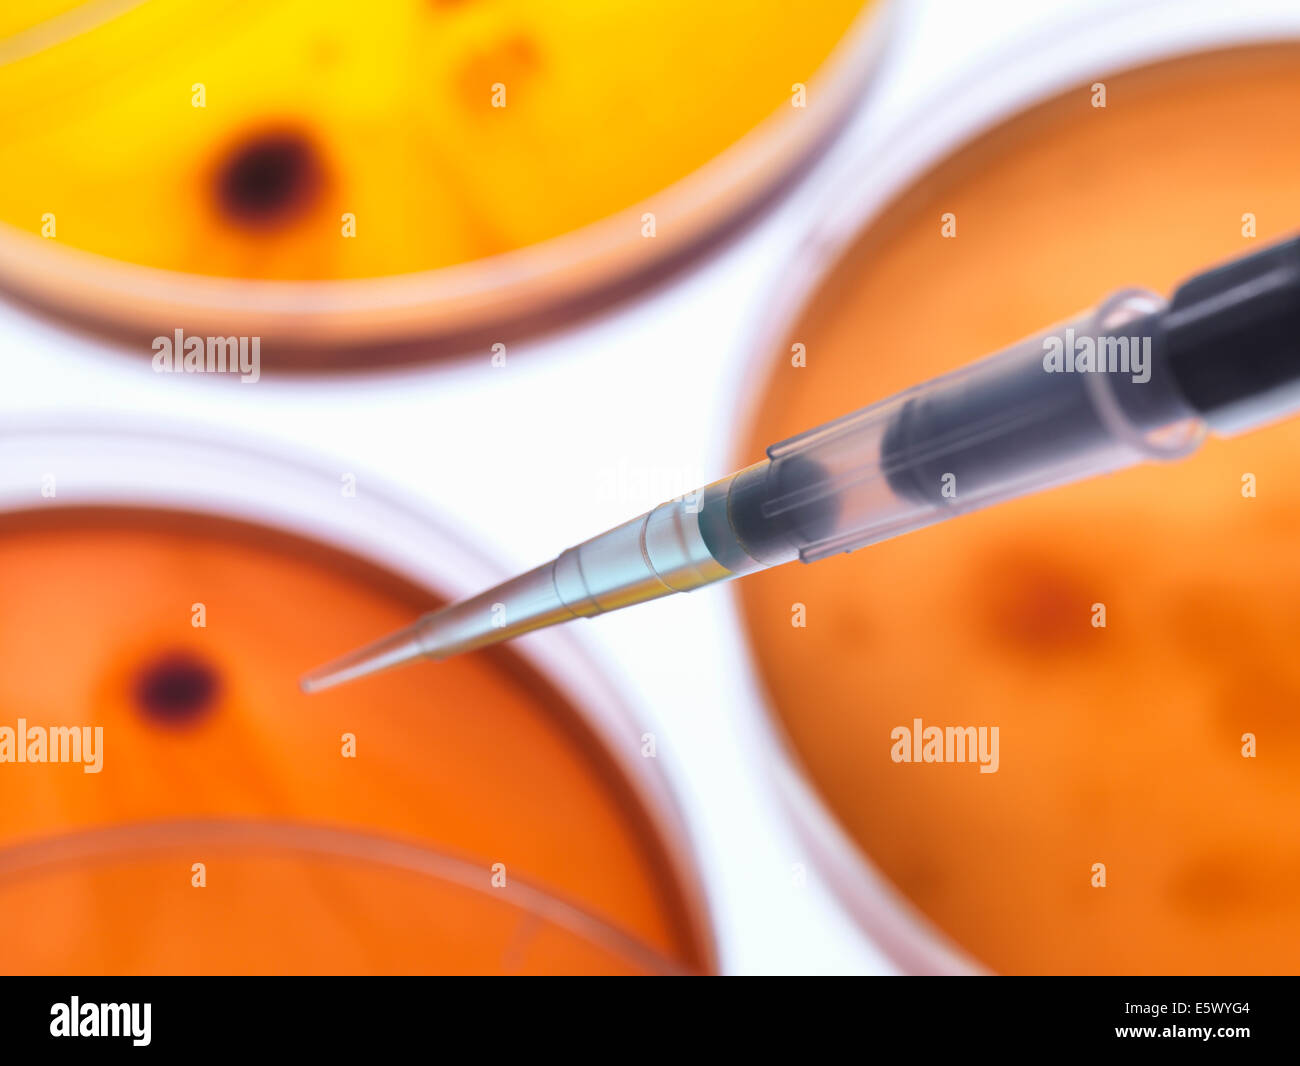 Scientist pipetting sample into a petri dish containing cultured bacteria in a microbiology lab Stock Photo